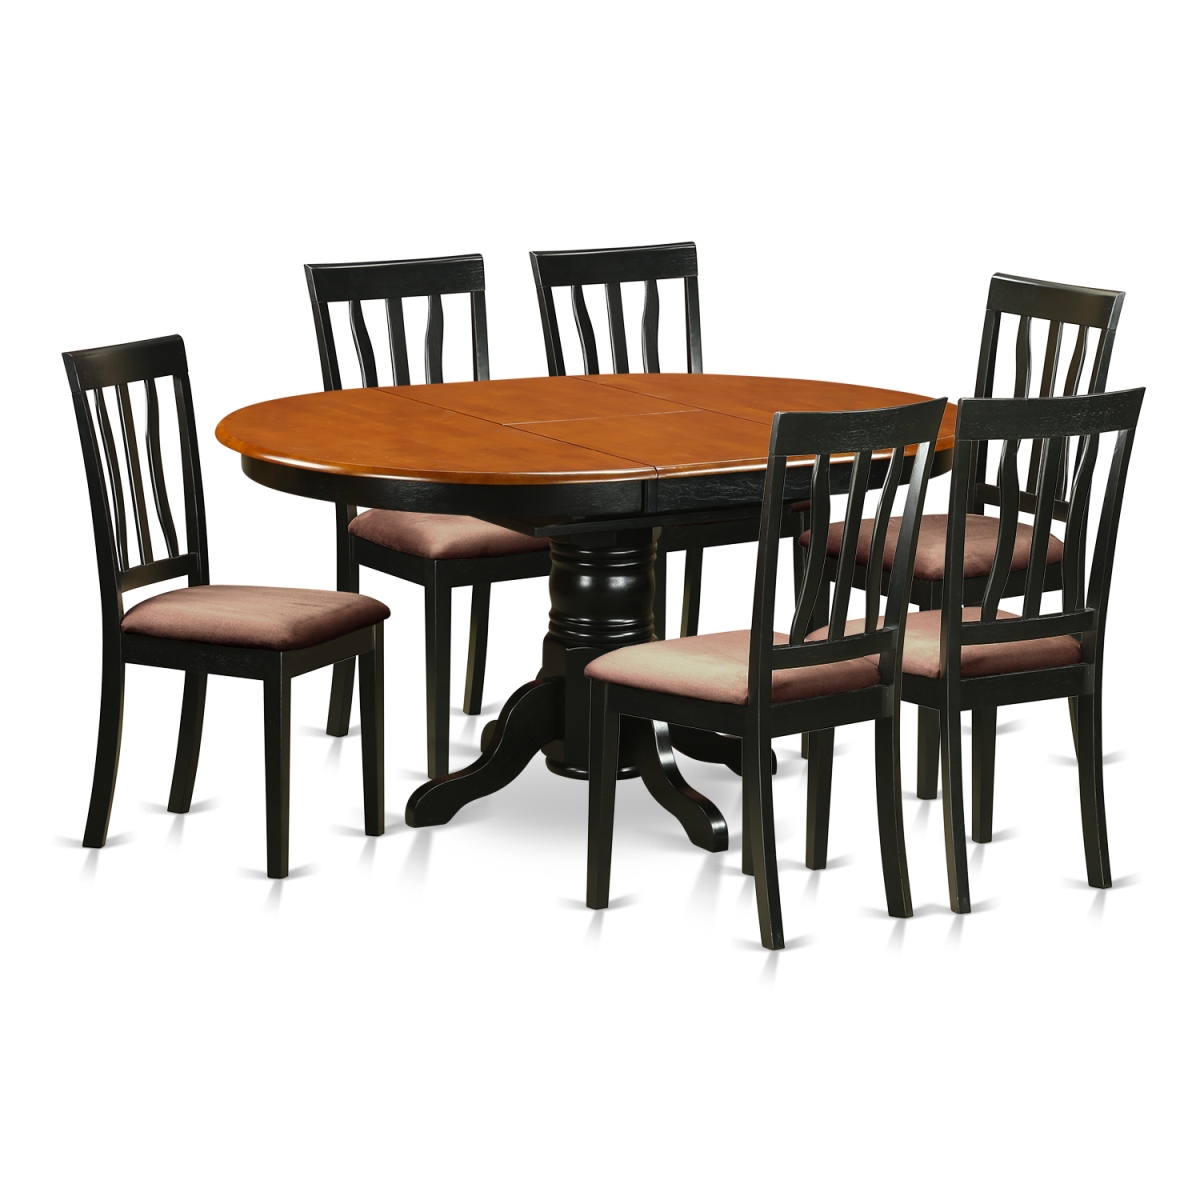 Picture of East West Furniture AVAT7-BLK-C Microfiber Dining Set with 6 Chairs, Black & Cherry - 7 Piece